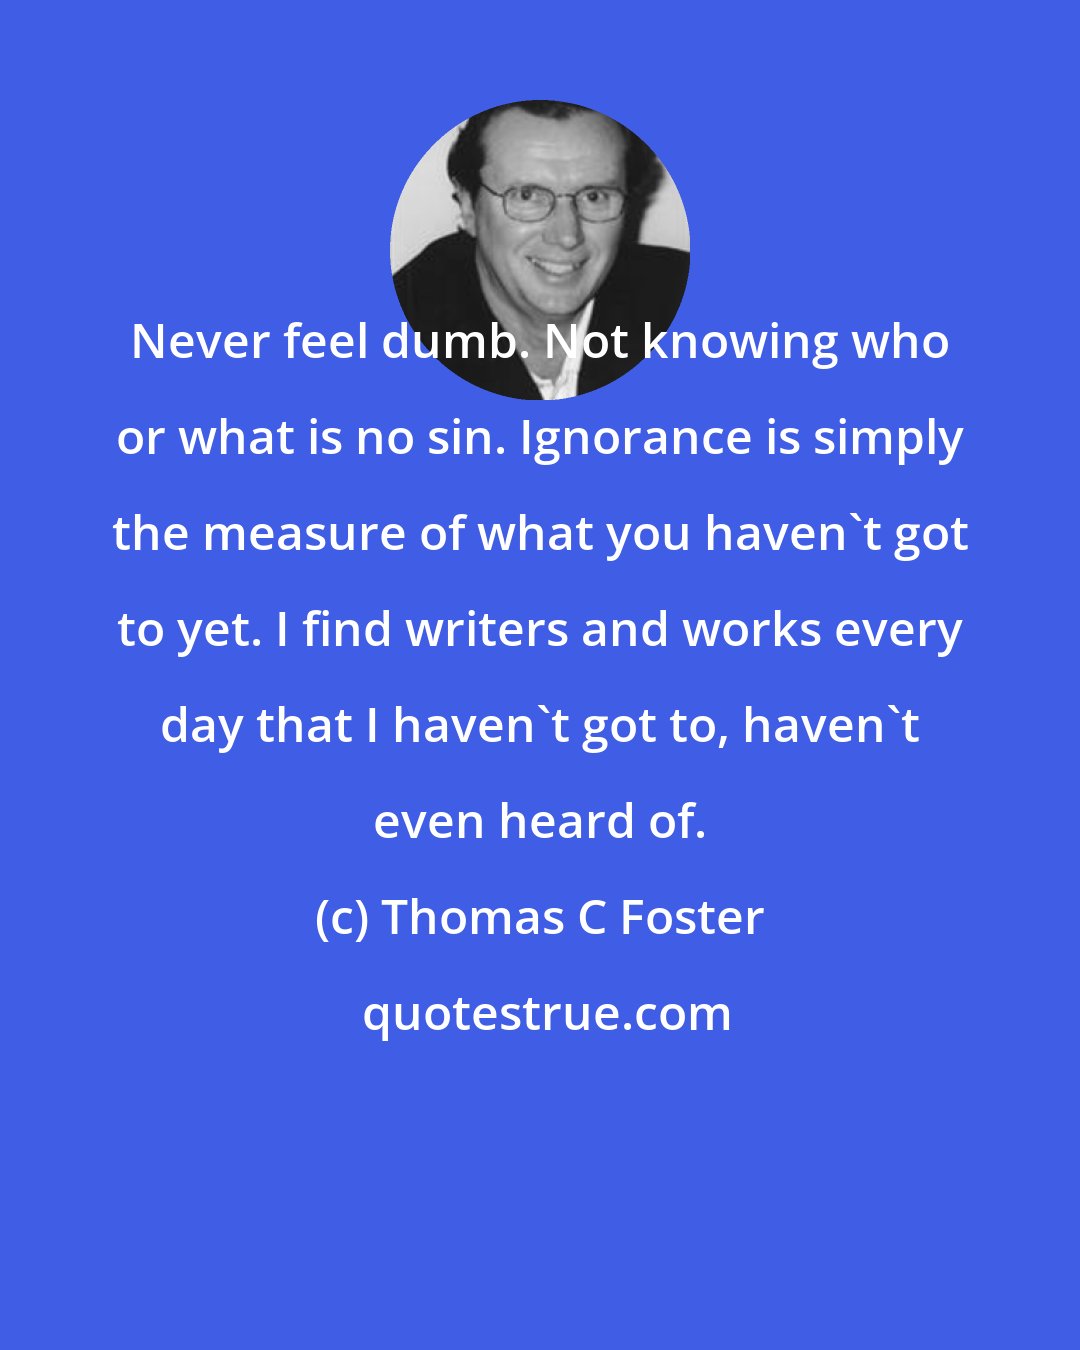 Thomas C Foster: Never feel dumb. Not knowing who or what is no sin. Ignorance is simply the measure of what you haven't got to yet. I find writers and works every day that I haven't got to, haven't even heard of.